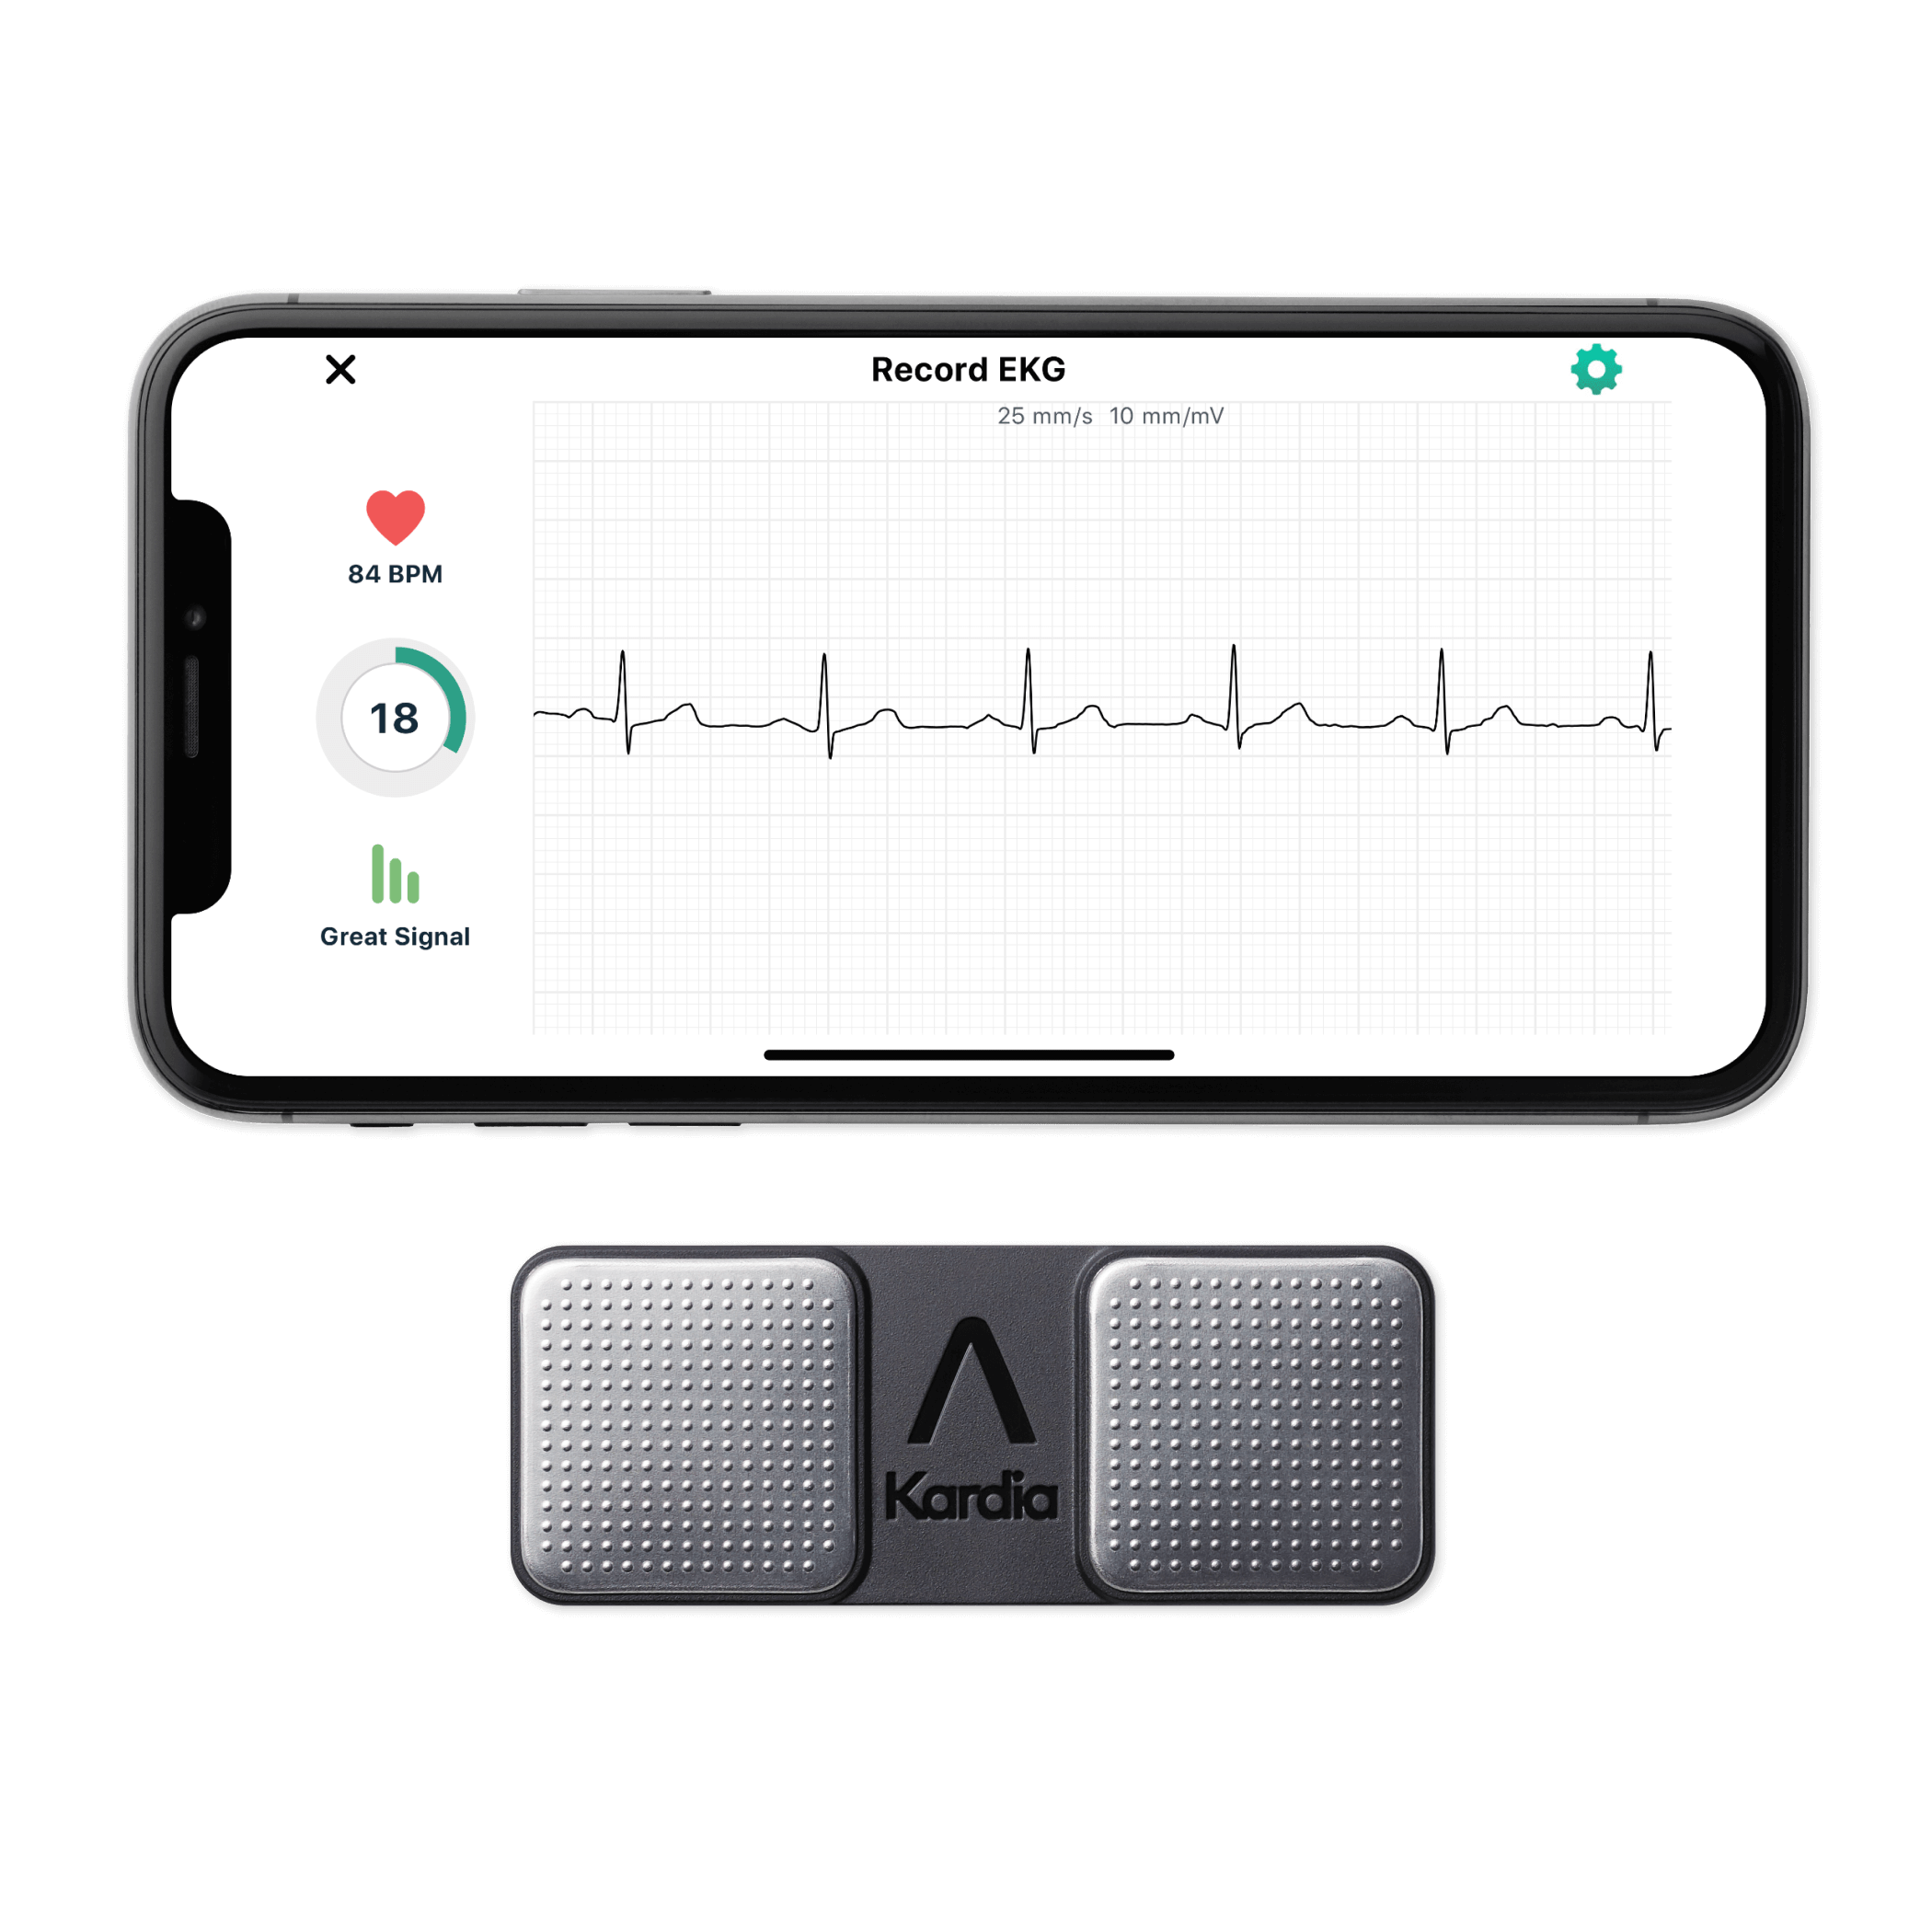  KardiaMobile Six-Lead Personal EKG Device - Record EKGs at  Home and Detect Irregular Heartbeats - Includes Access to 6 Months of  KardiaCare Heart Health Membership - FSA/HSA Eligible : Sports & Outdoors